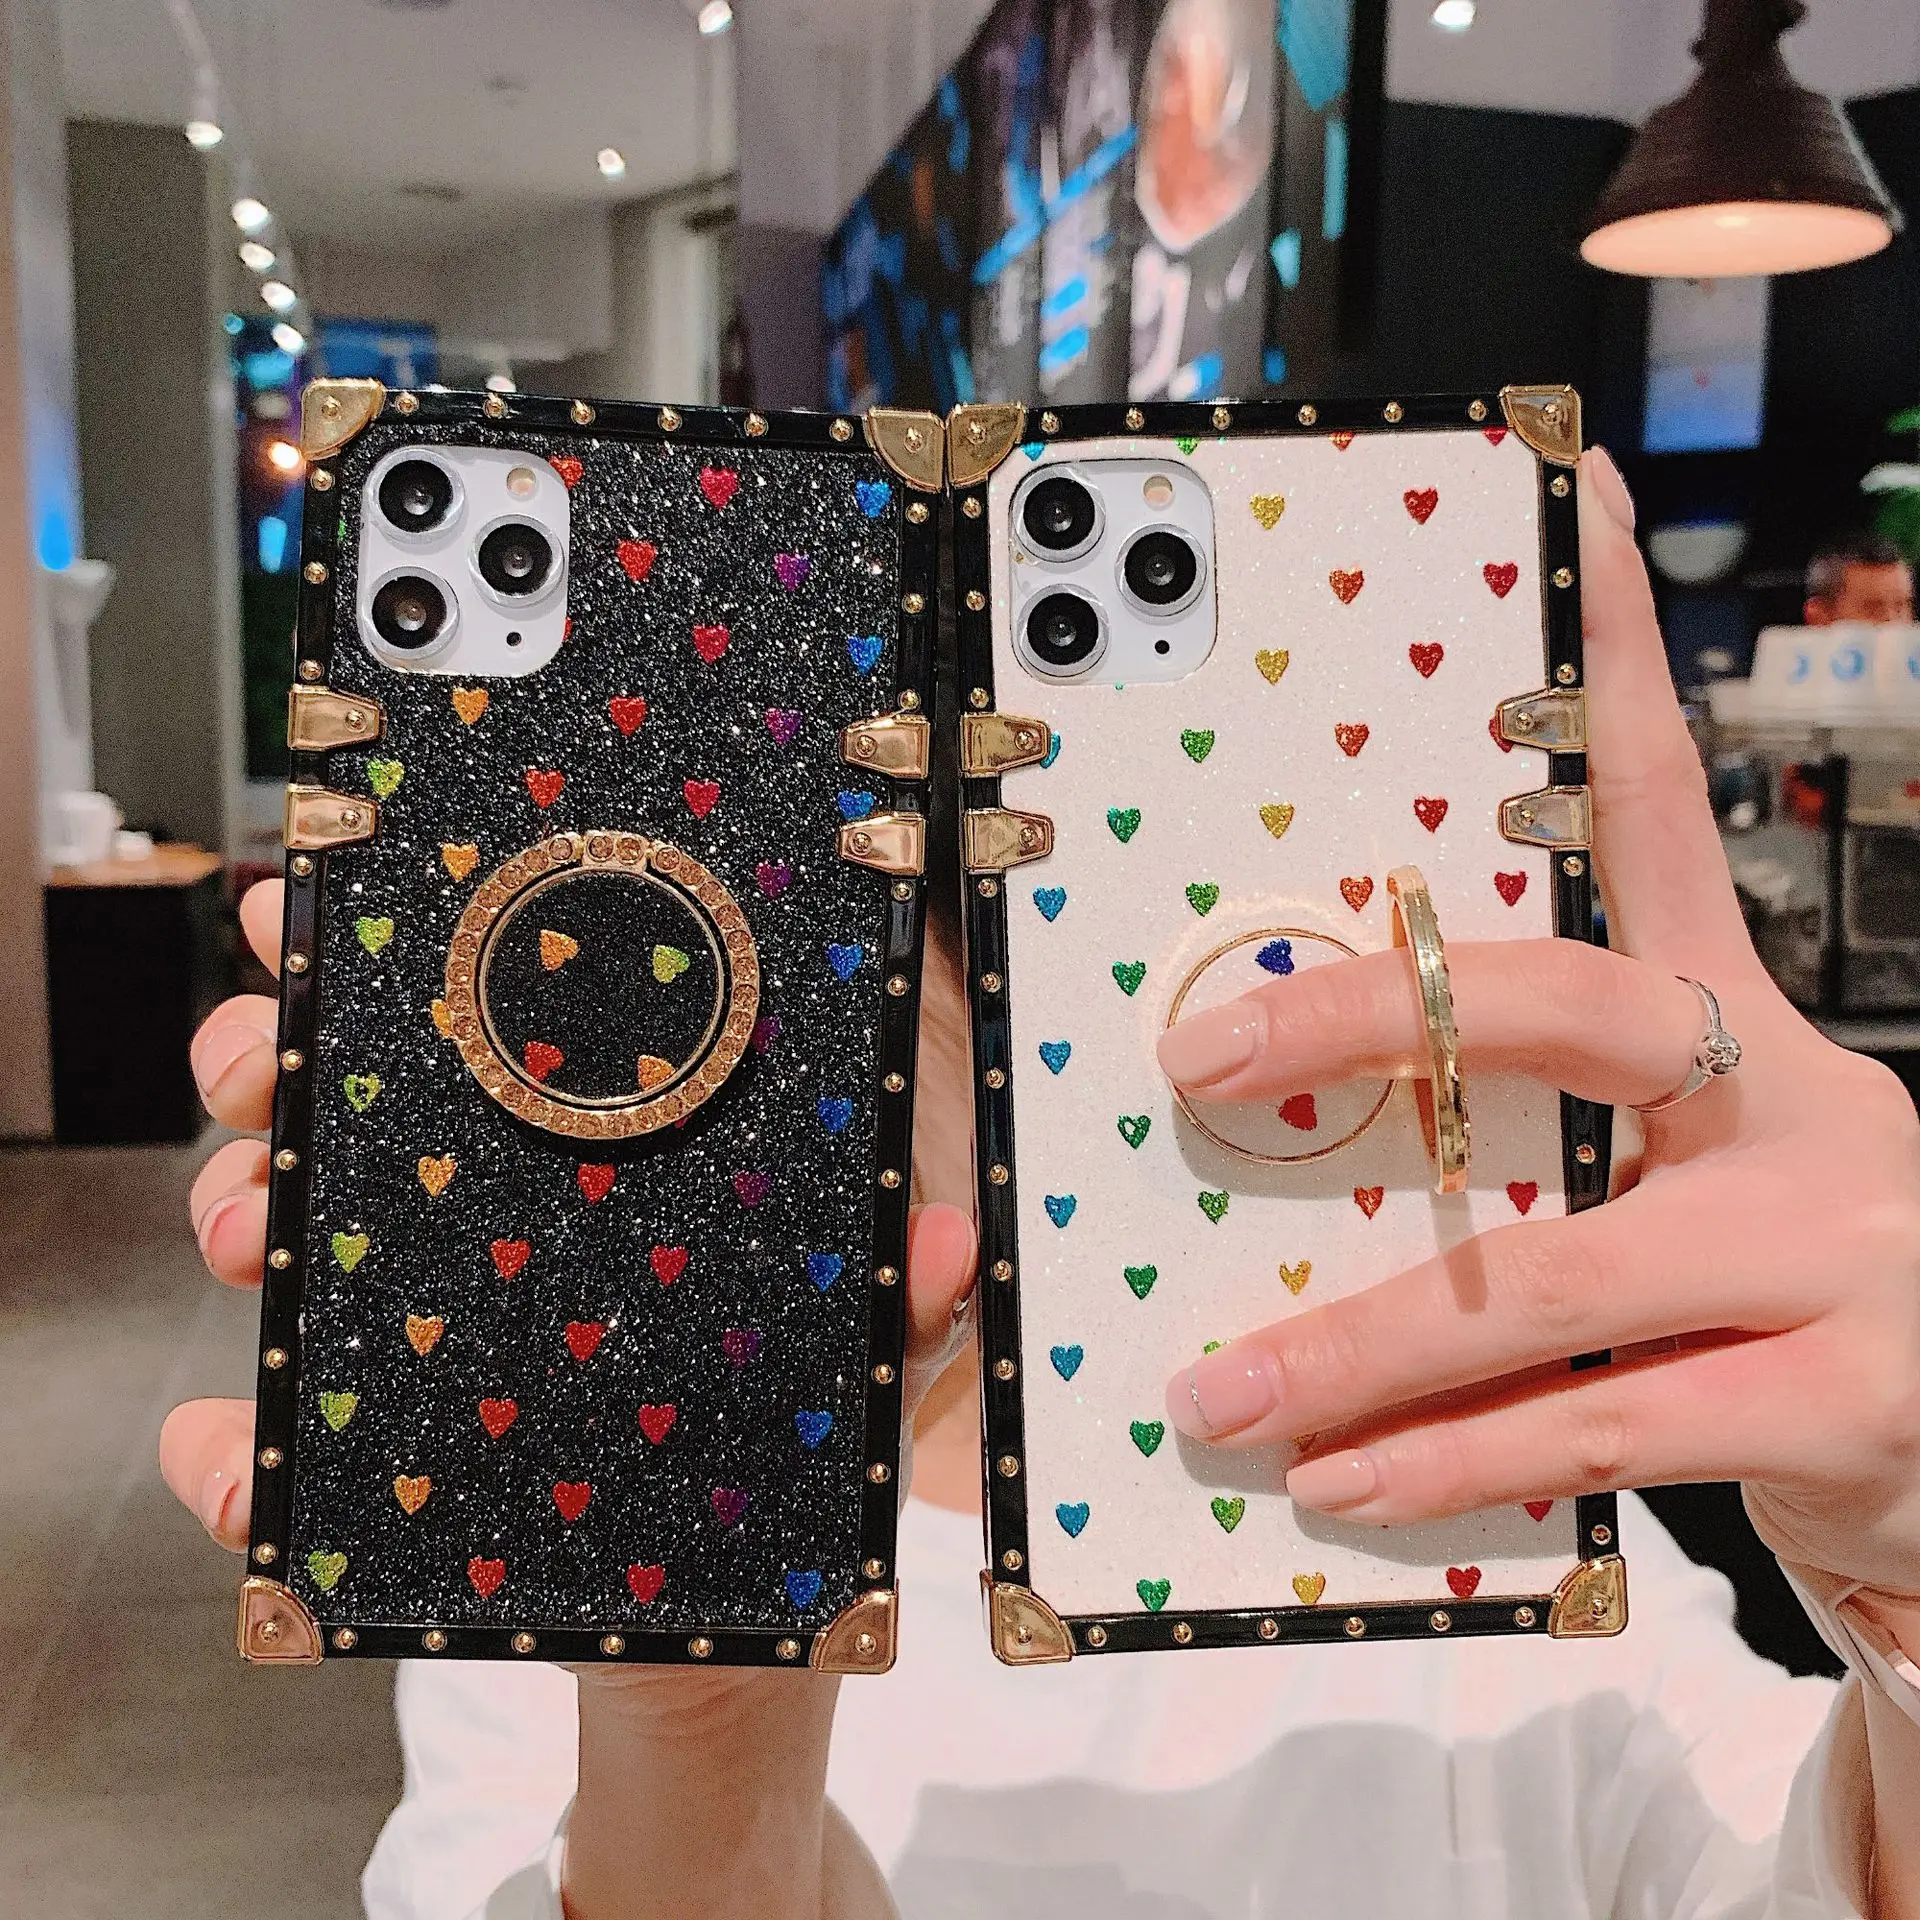 10pcs Luxury finger ring holder glitter cellPhone Case For iPhone 12 mini 11 Pro Max XS XR X 8 7 6s Plus cases cover covers